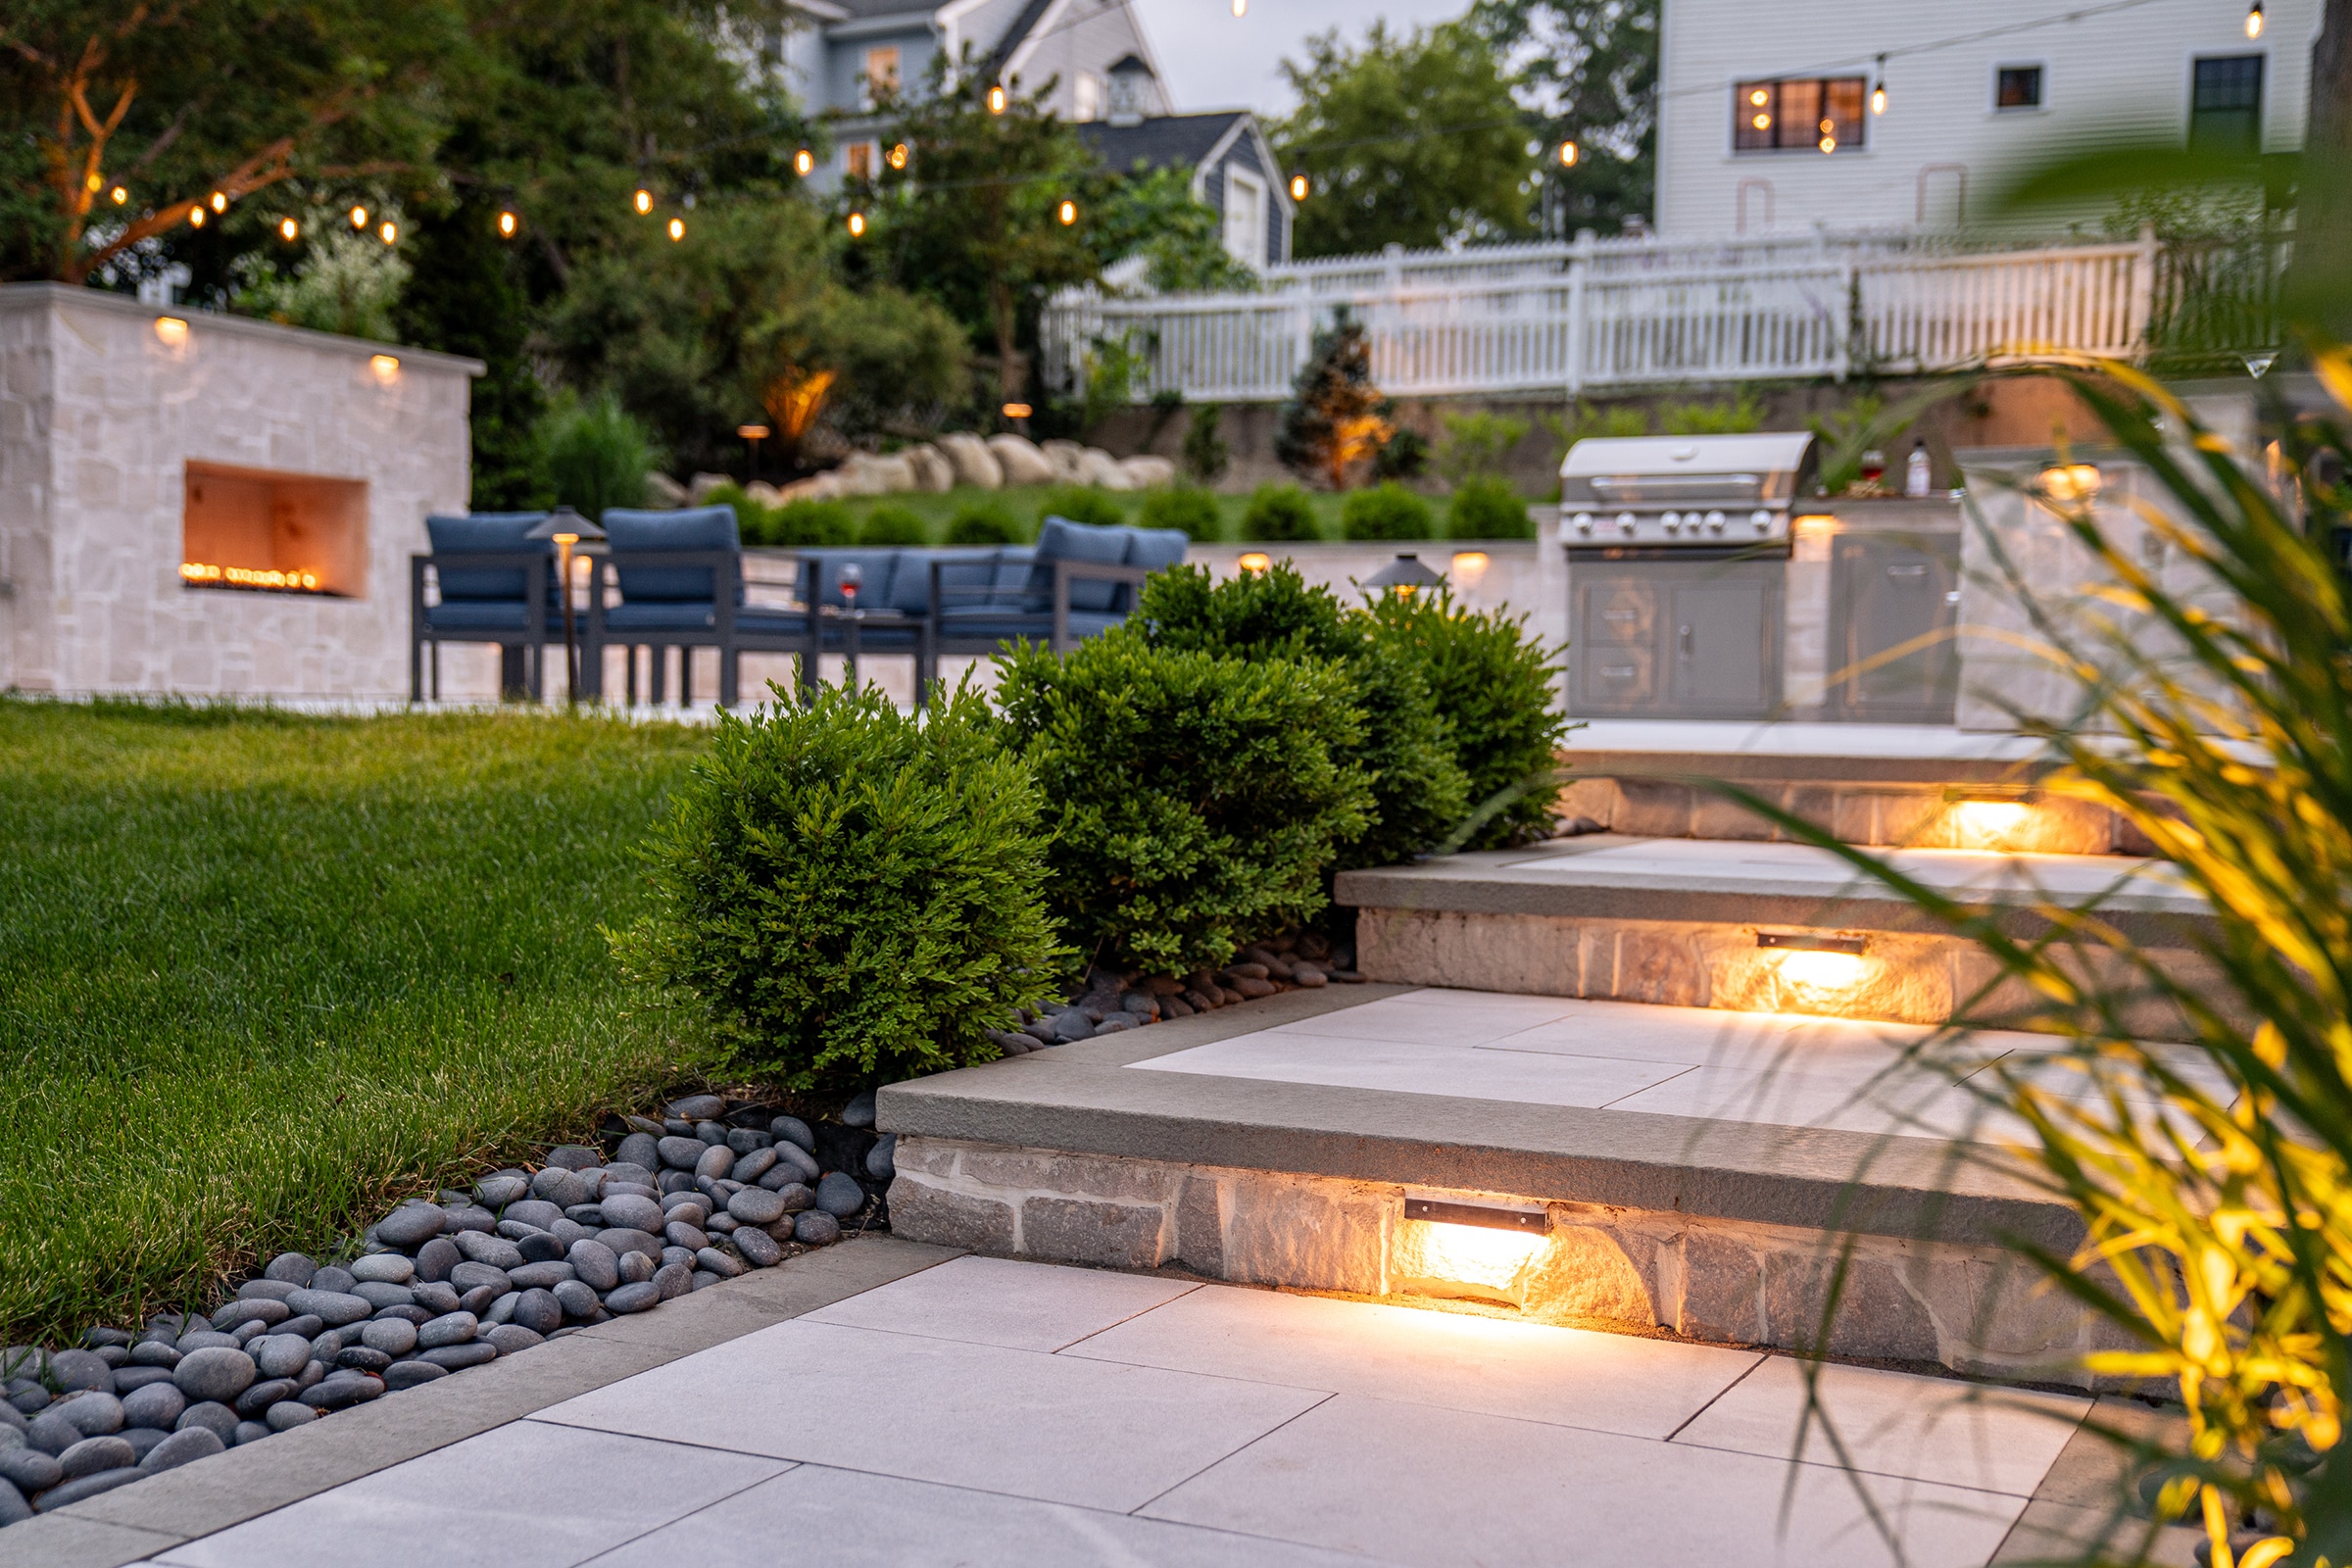 Stone walkway with stone steps and buit-in low voltage lighting. Backyard patio and outdoor kitchen in the background.